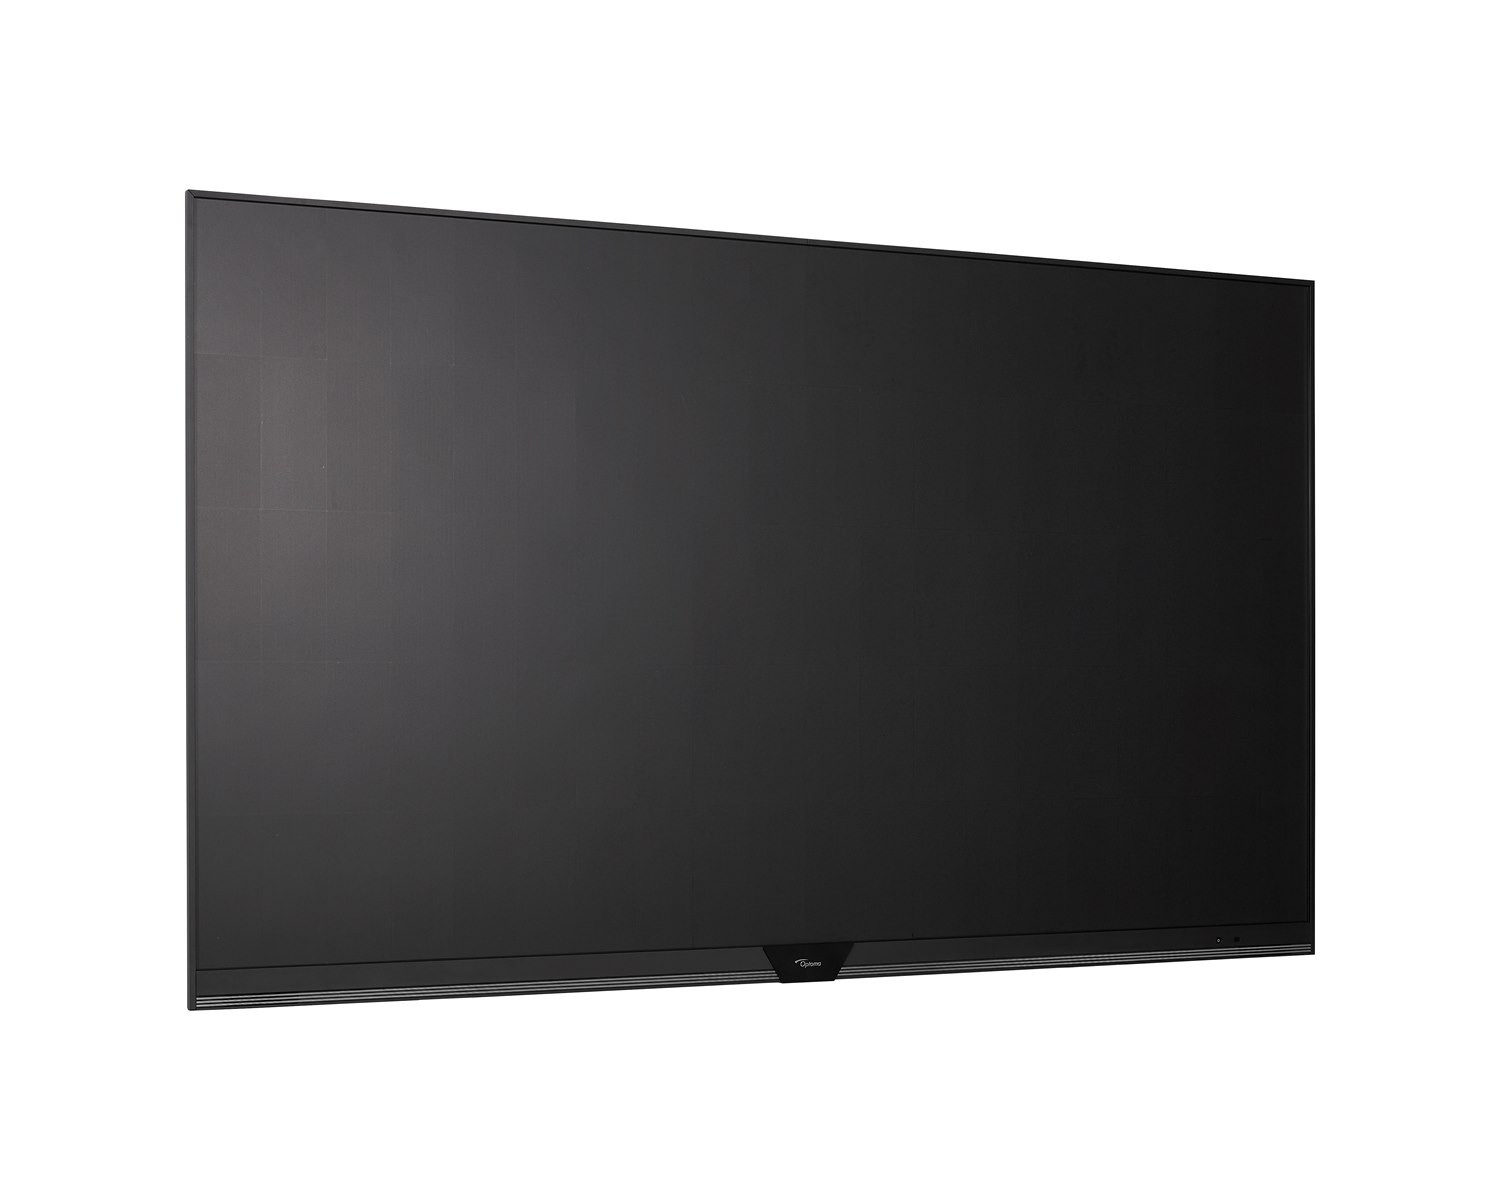 Optoma-FHDQ135s-135-All-in-One-Quad-LED-Display